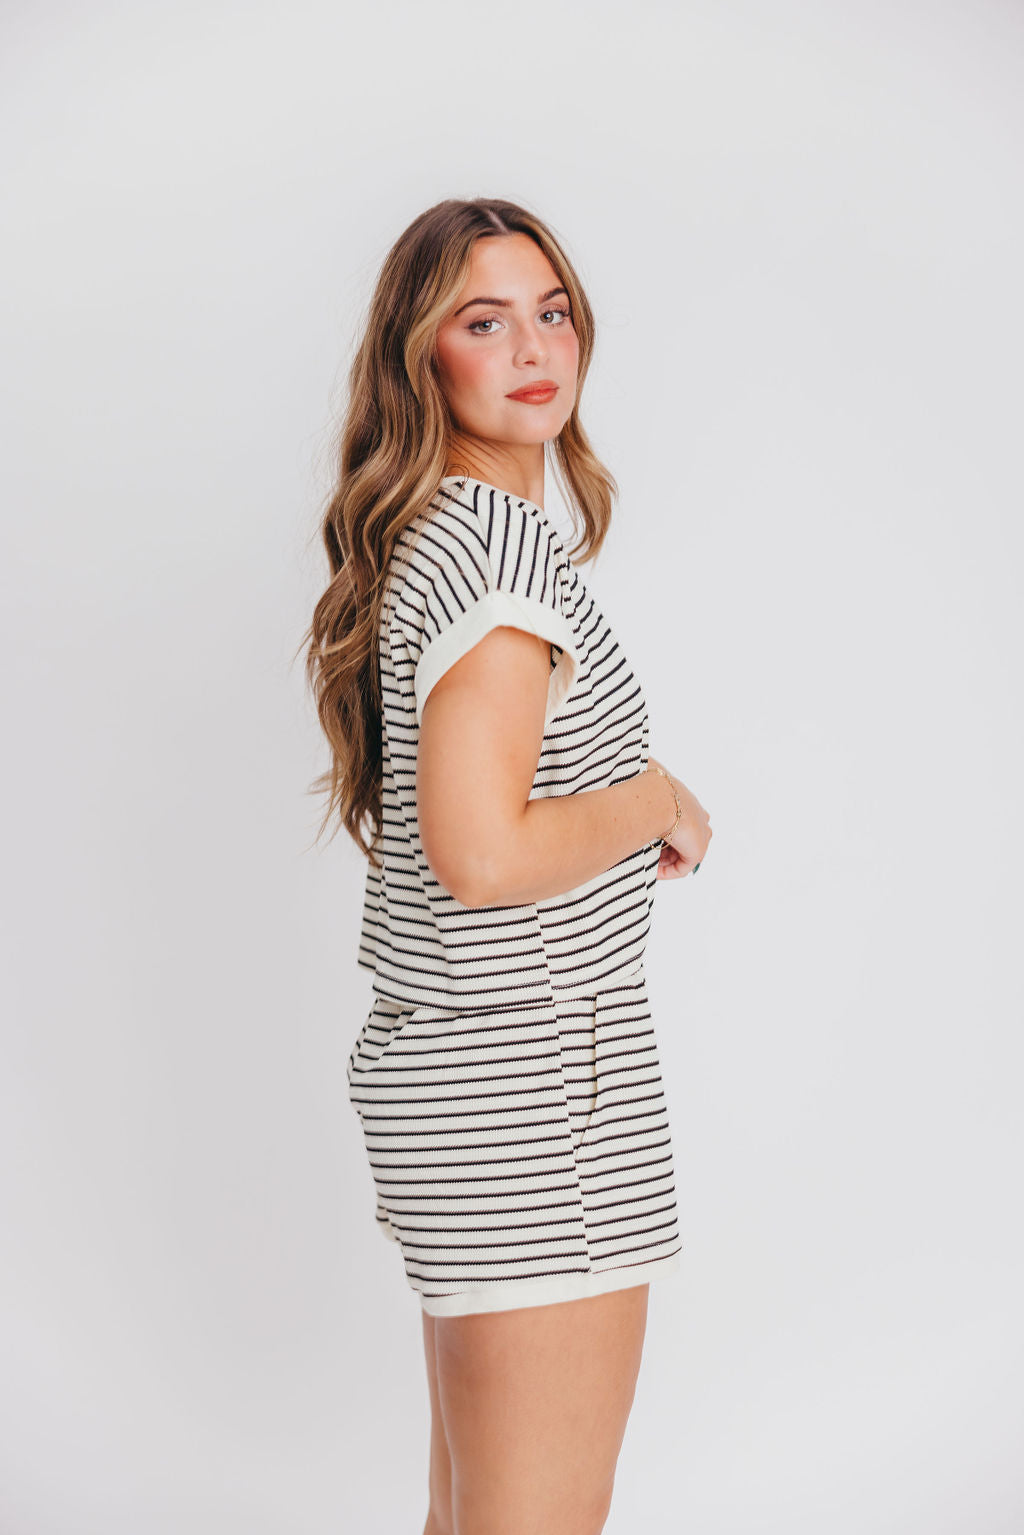 Ramona Textured Knit Top in White/Black Stripe (bottoms sold separately)